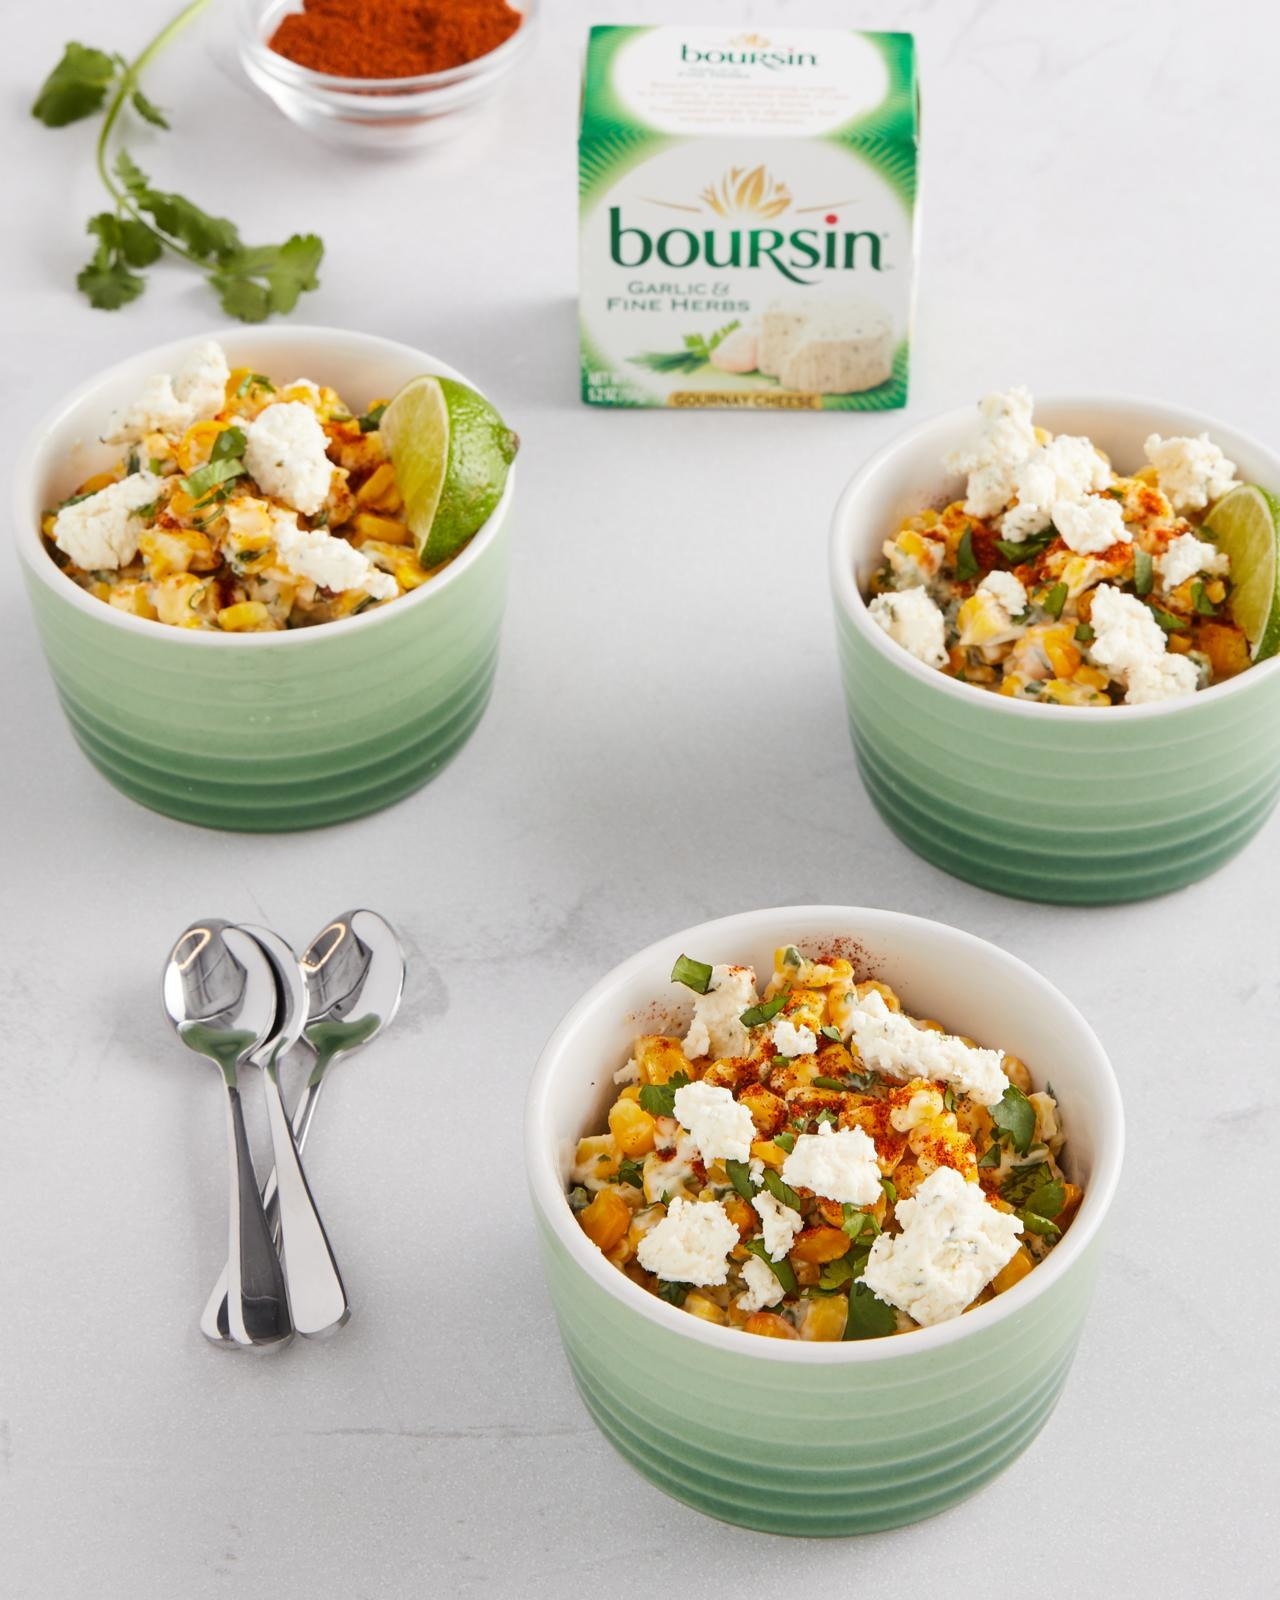 Three bowls with esquites and crumbled Bousin cheese